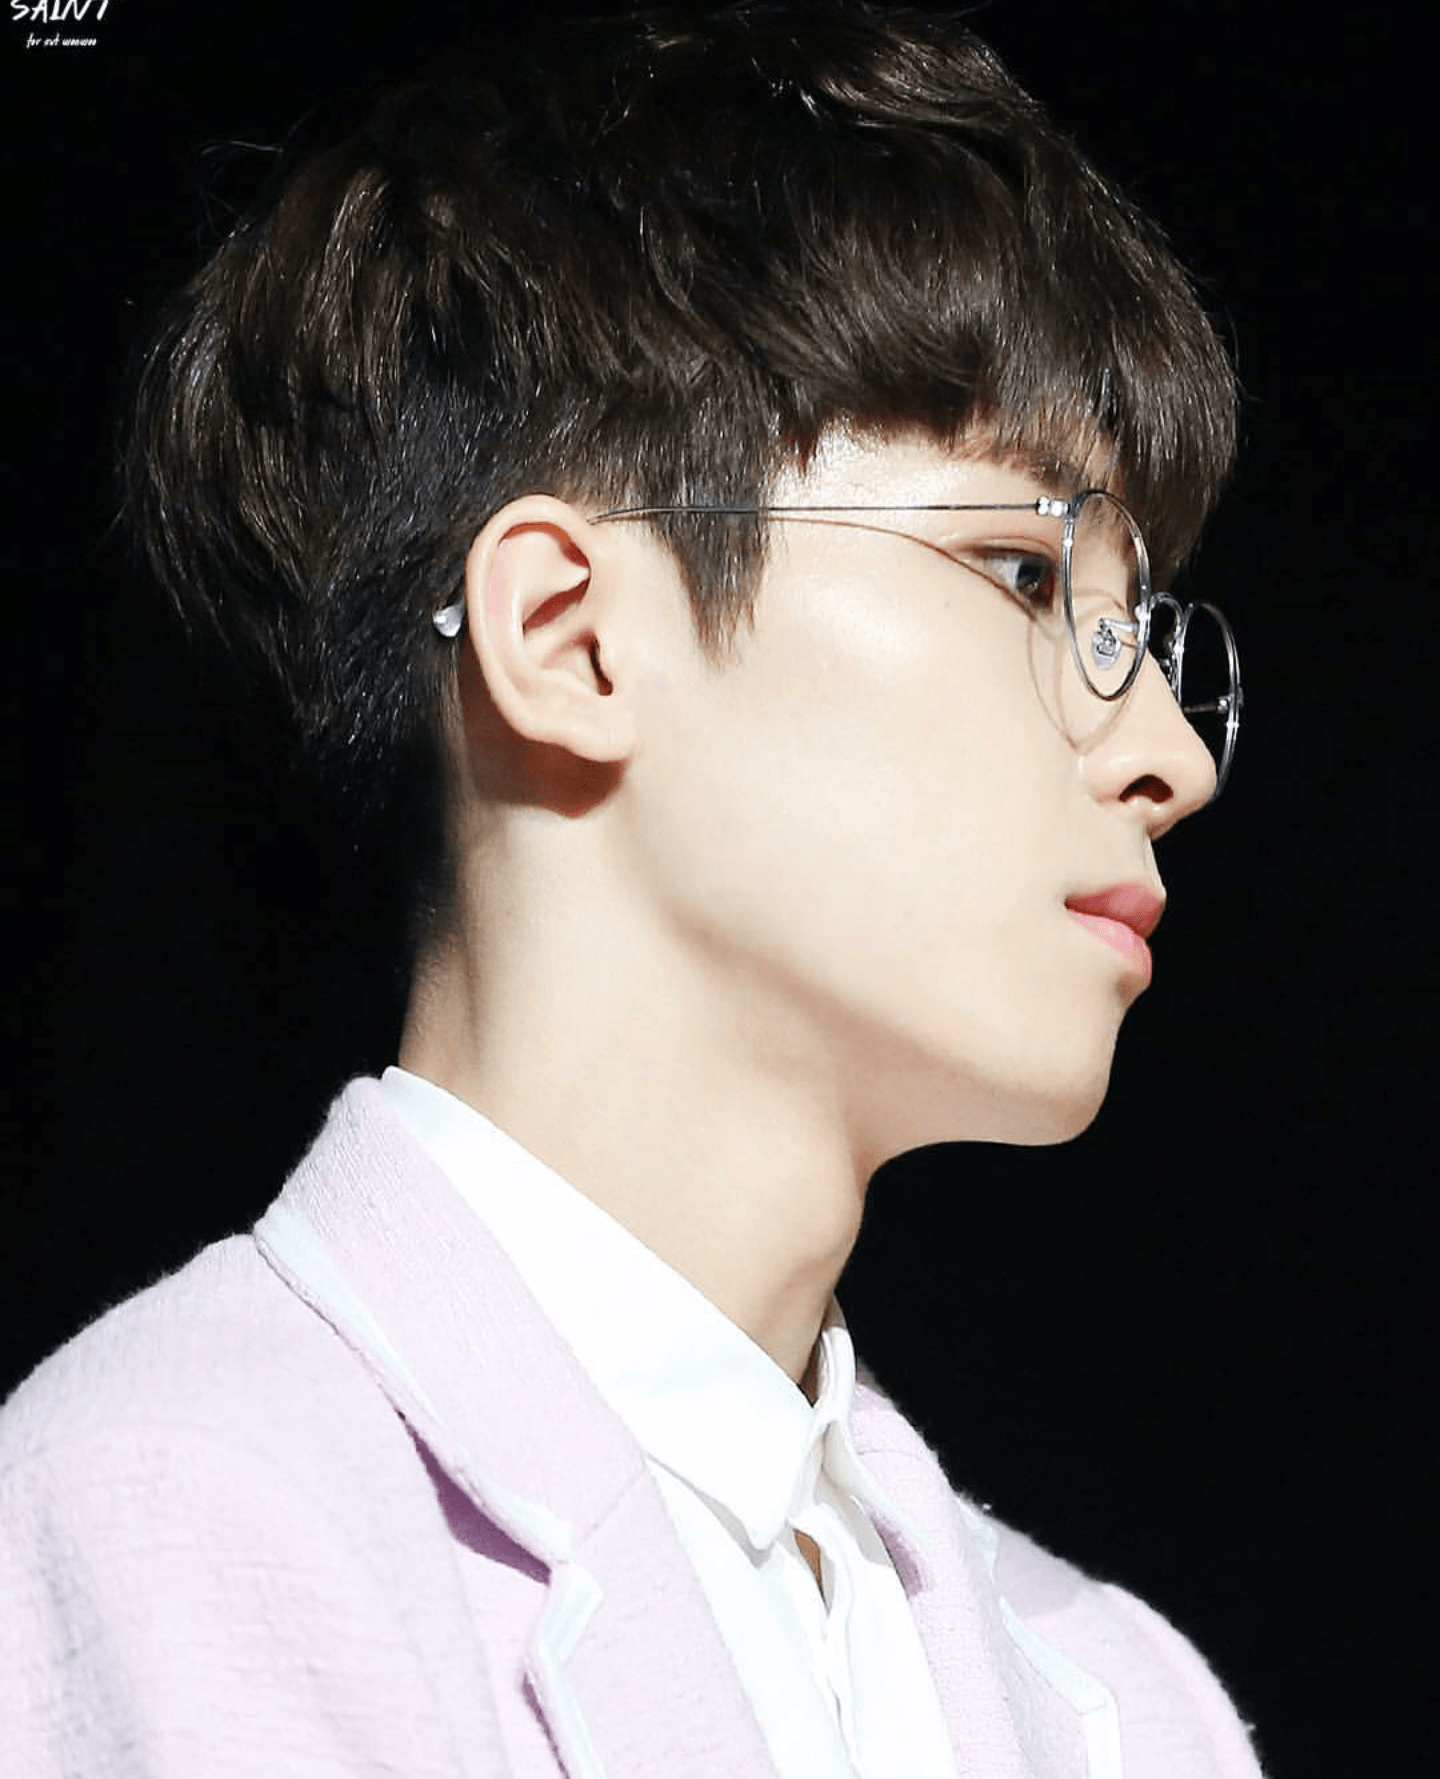 Wonwoo looks handsome even in glases. 